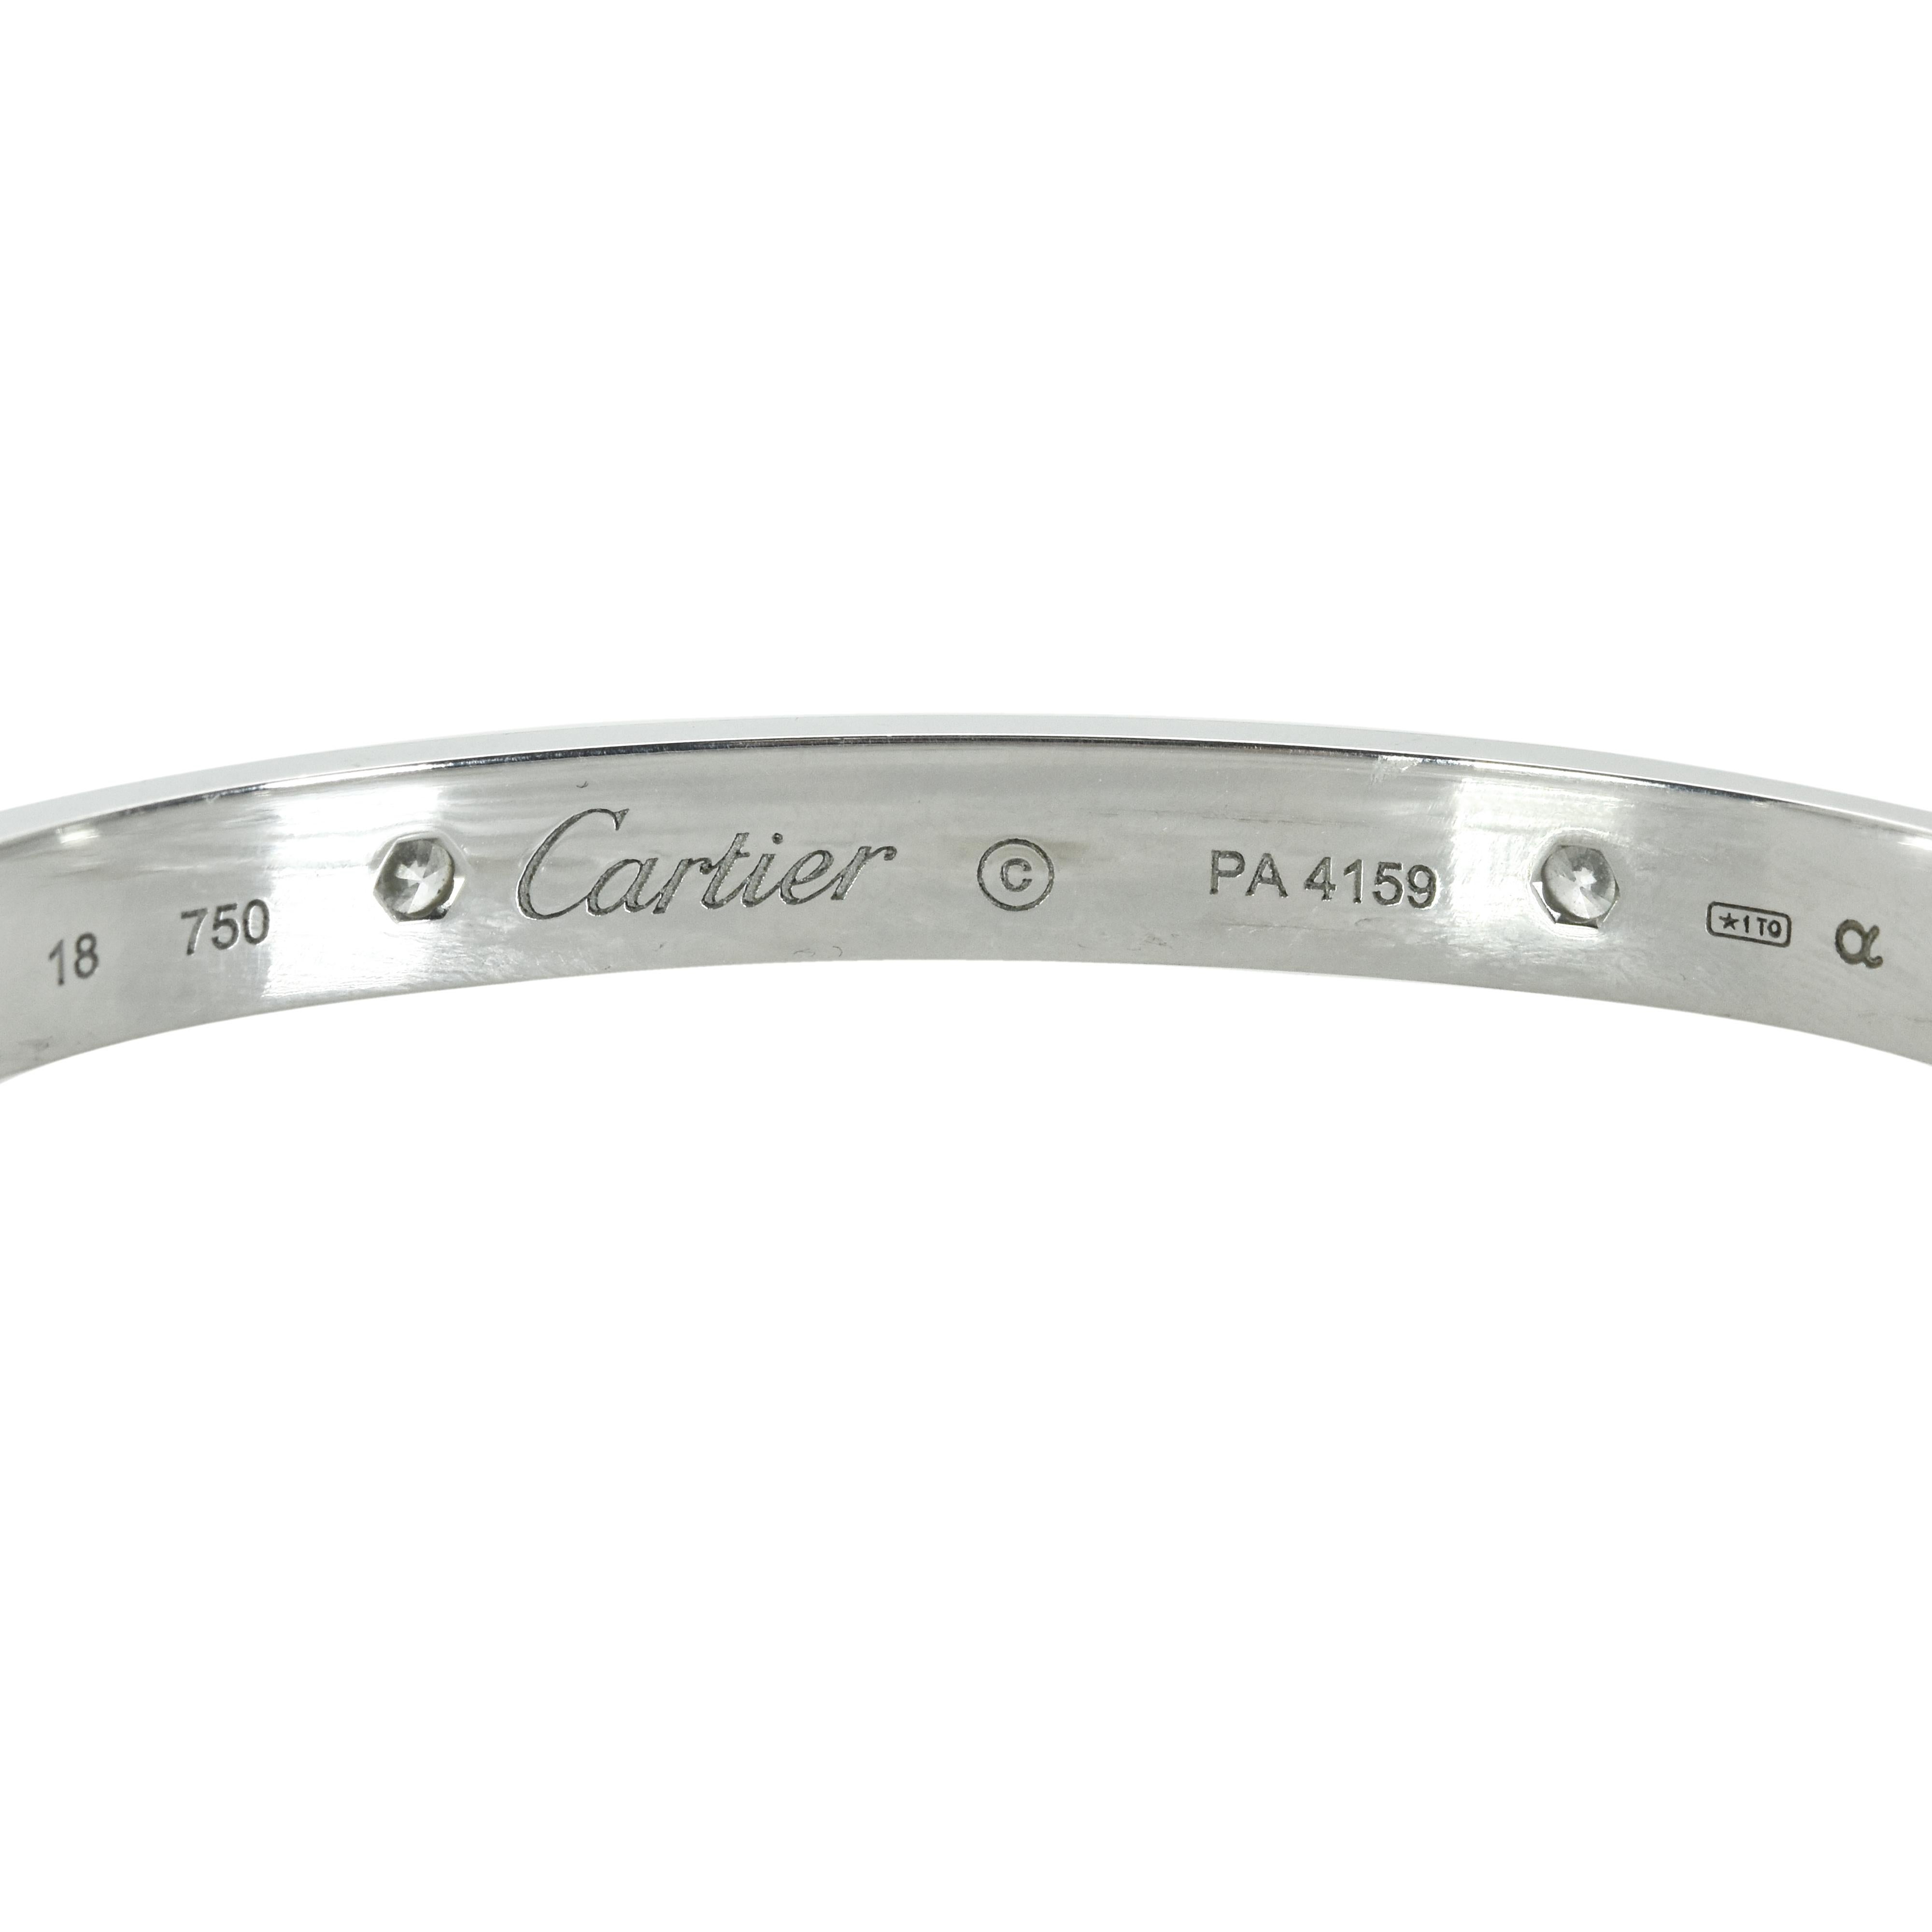 From Cartier's iconic Love Collection, this bracelet is the four diamond love bracelet in 18k white gold. The four diamonds total 0.42 carats and the bracelet is in a size 18, and comes with a screwdriver.